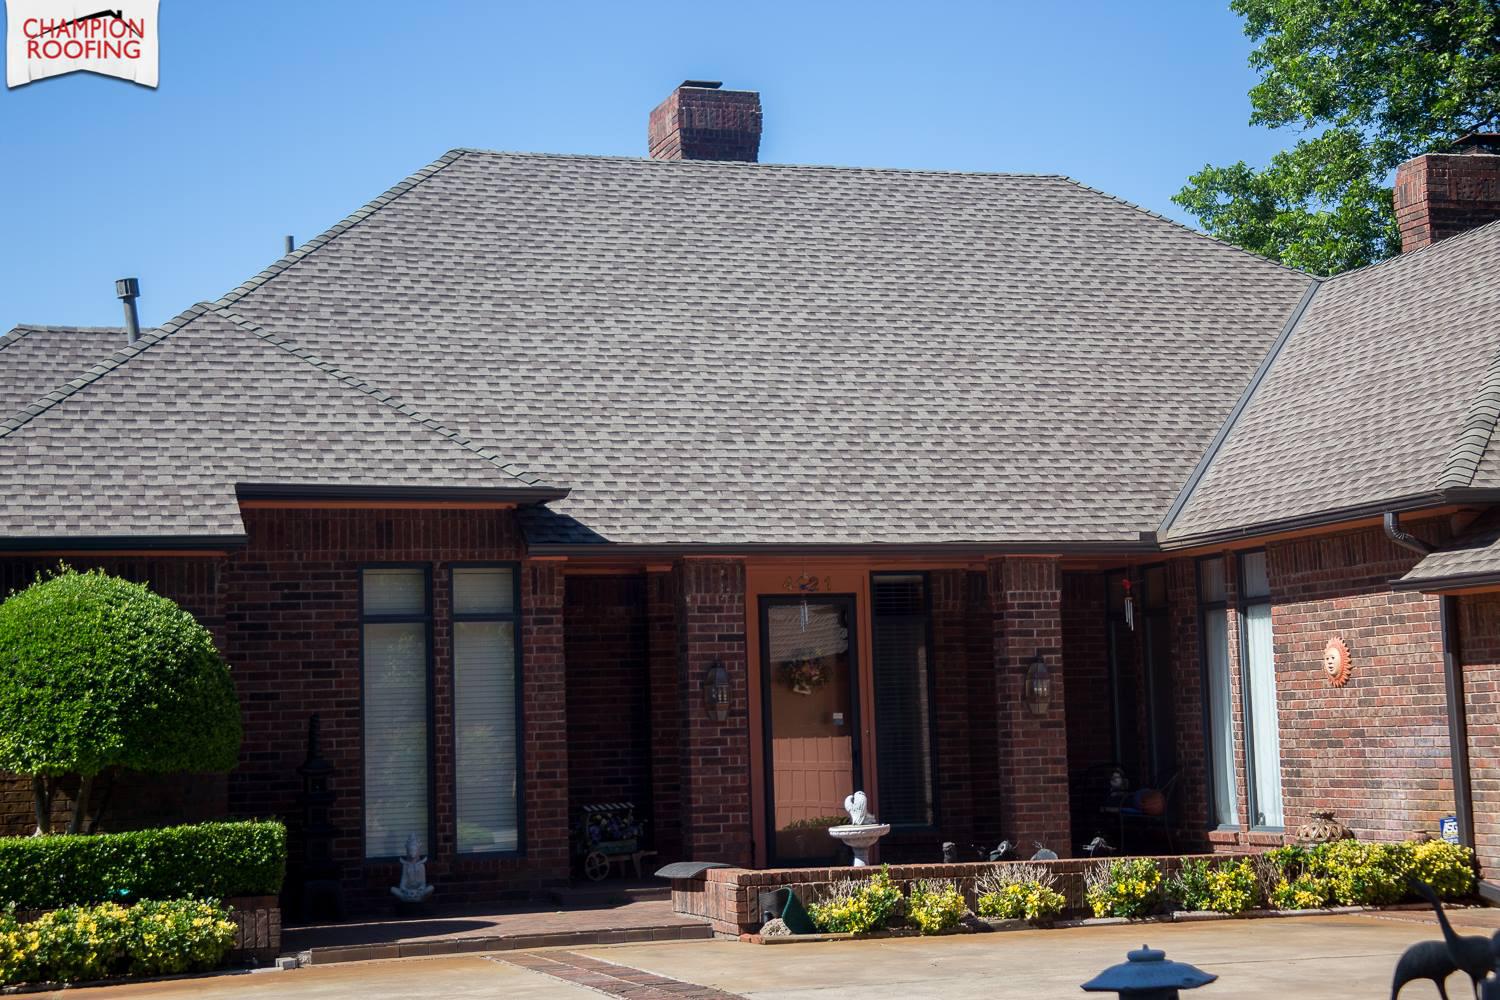 Champion Roofing - Gallery 10